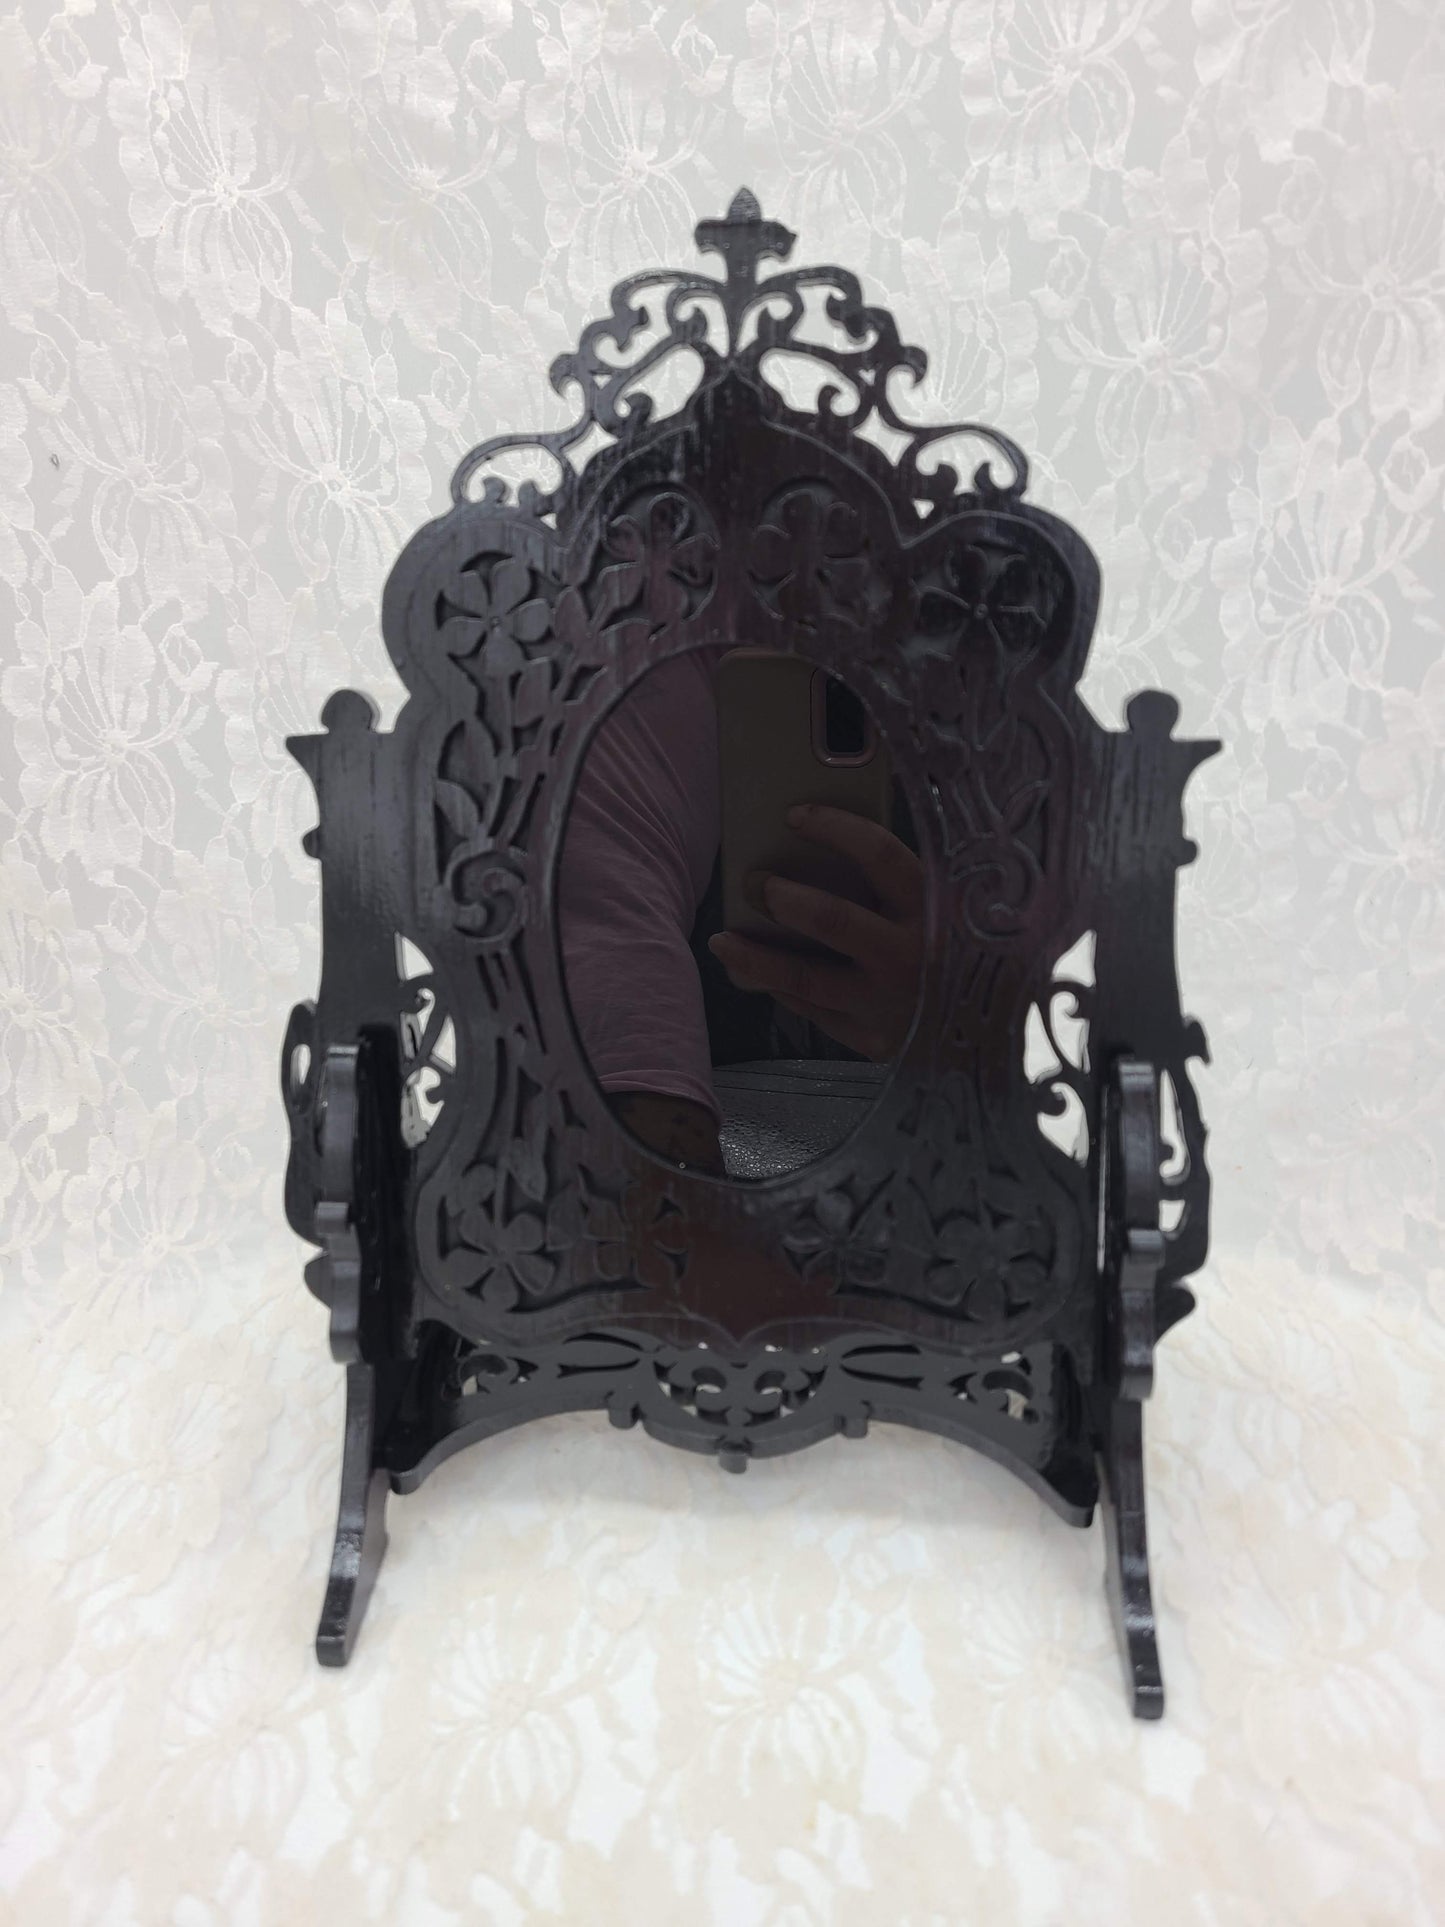 Handmade DIY BLACK GLASS Scrying Mirror 12" by 8" Freestanding Hand Hewn Wood Antique Glass ~ Witchy ~ Divination